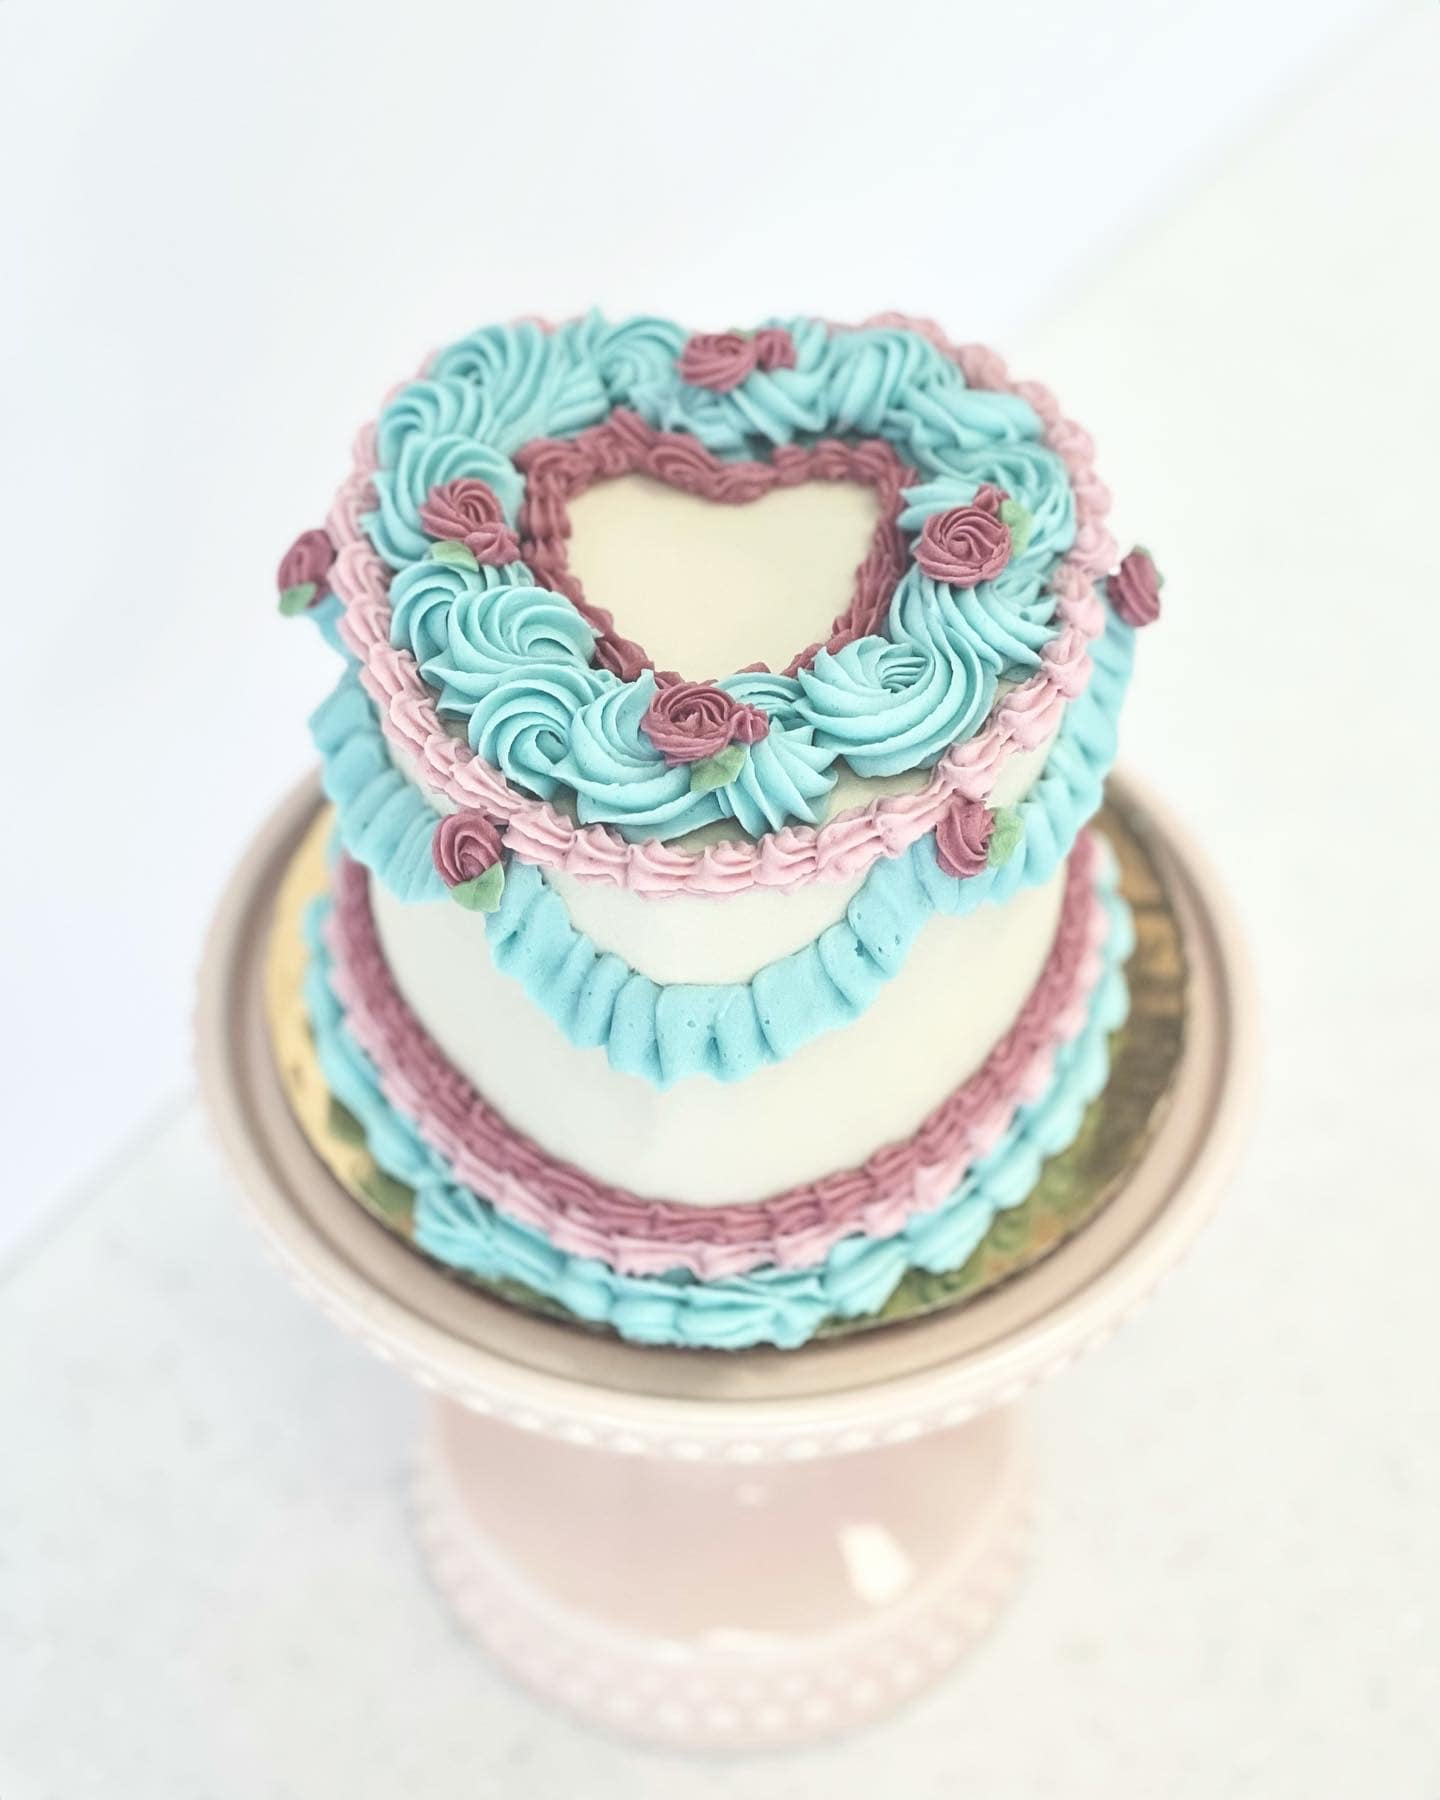 Spectacular, vintage-inspired cakes are a piping hot social media smash